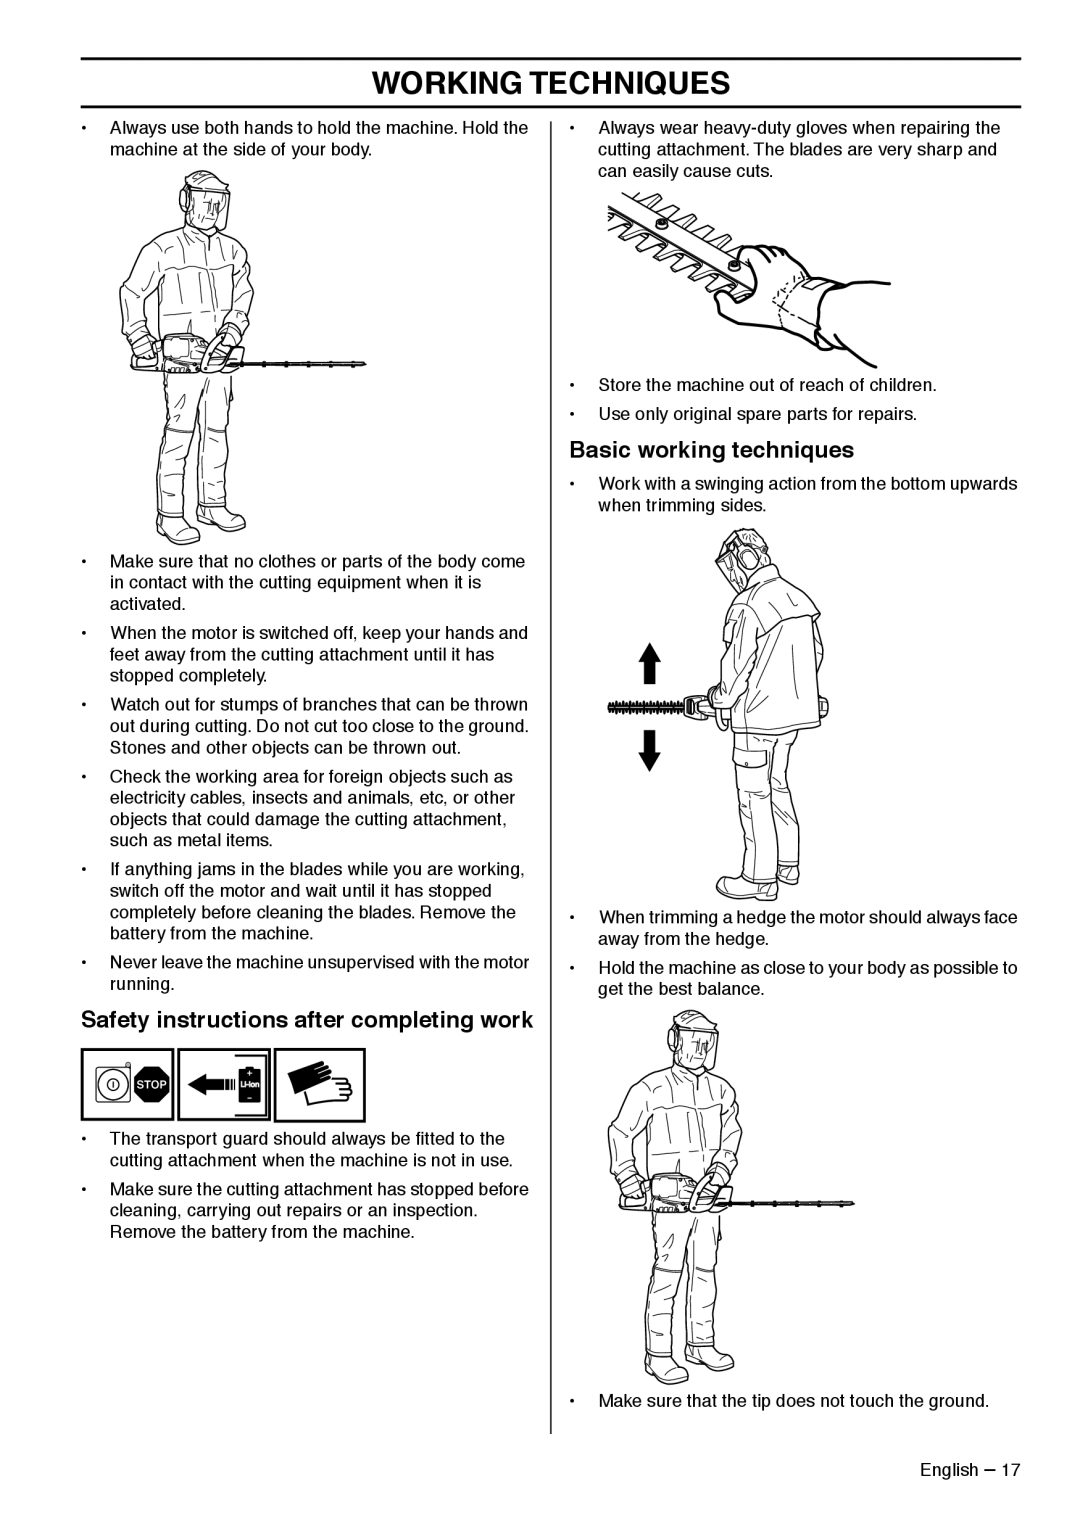 Husqvarna 536LiHD60X, 536LiHD70X Safety instructions after completing work, Basic working techniques, Working Techniques 